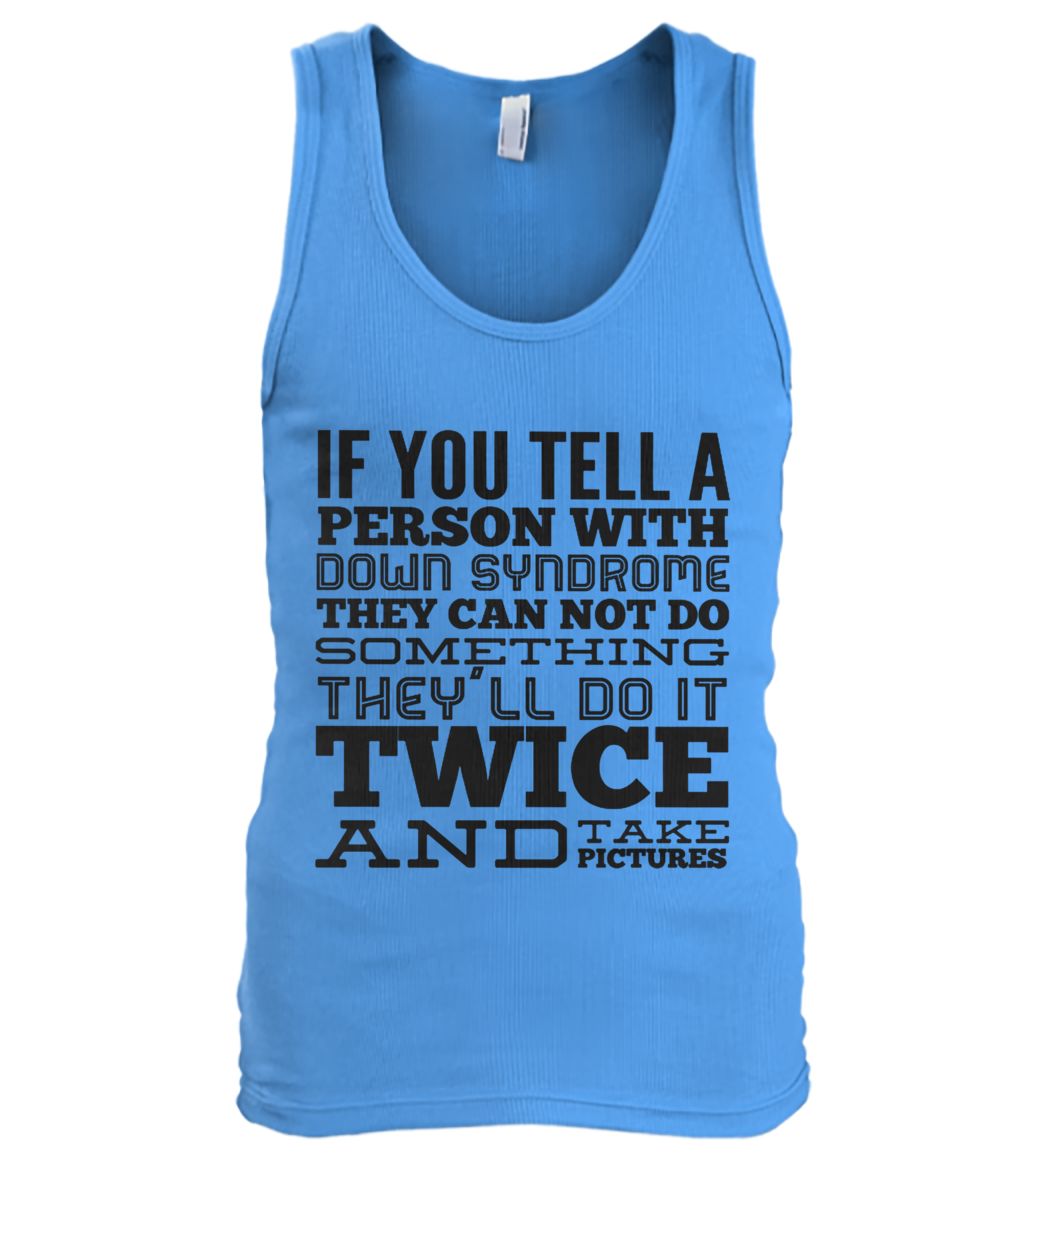 If you tell a person with down syndrome they can not do something men's tank top